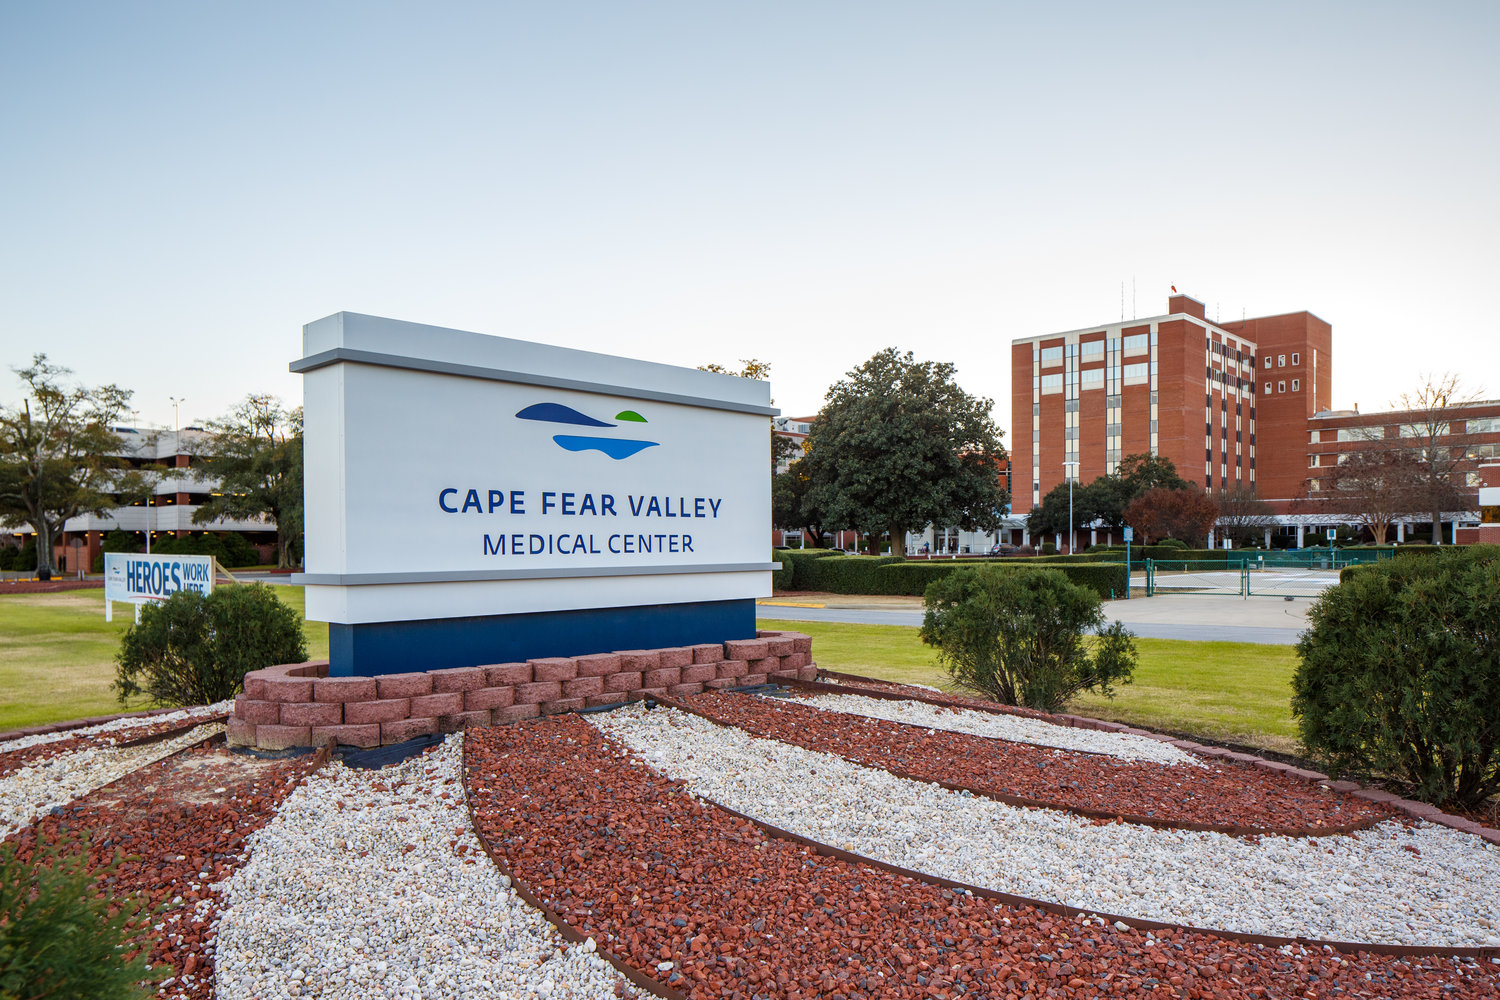 Cape Fear Valley Health System will receive $15 million from the state for the Center for Medical Education building under construction at Cape Fear Valley Medical Center.